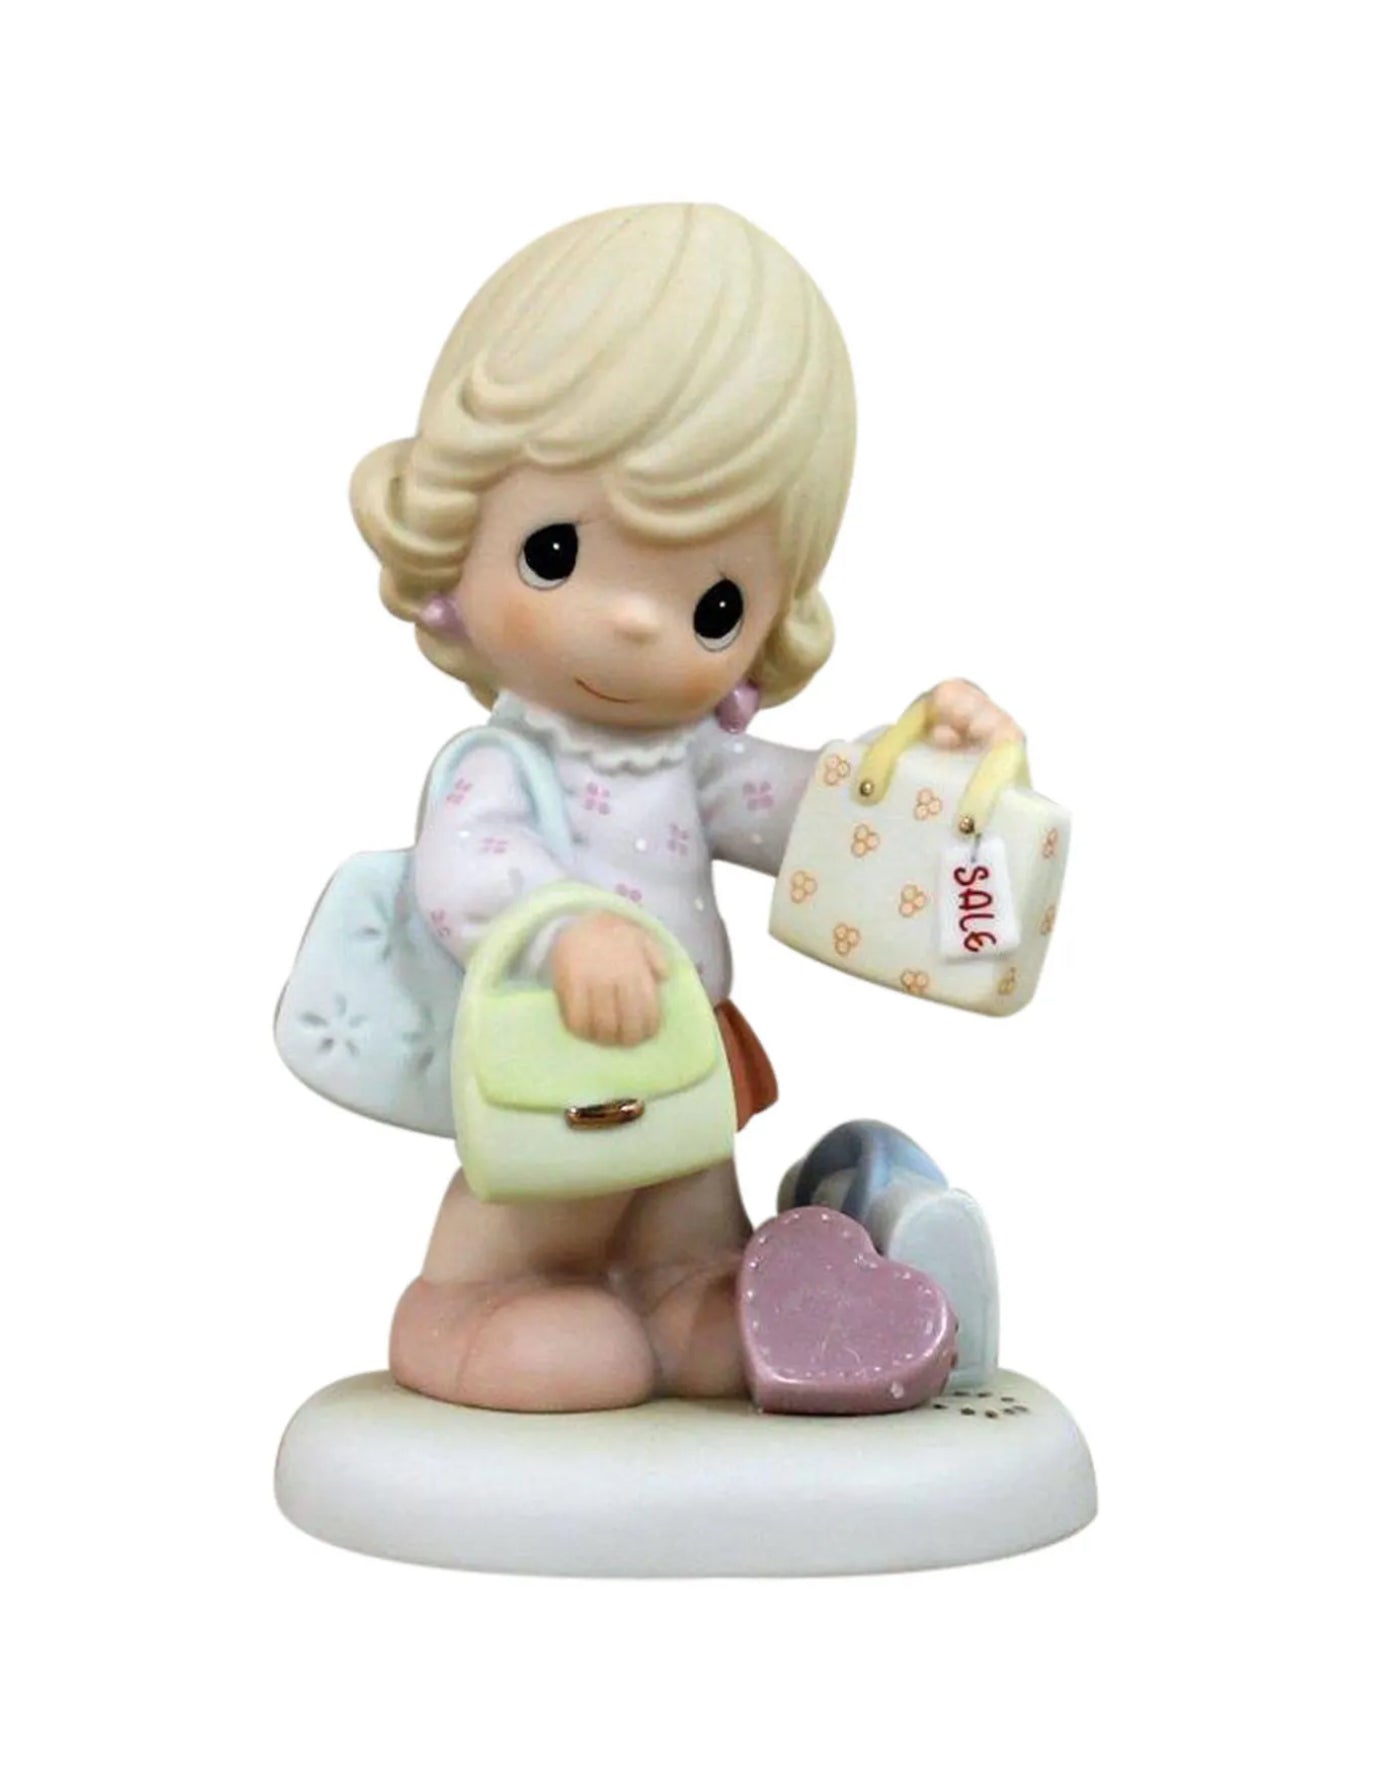 Purse-suit Of Happiness  - Precious Moment Figurine